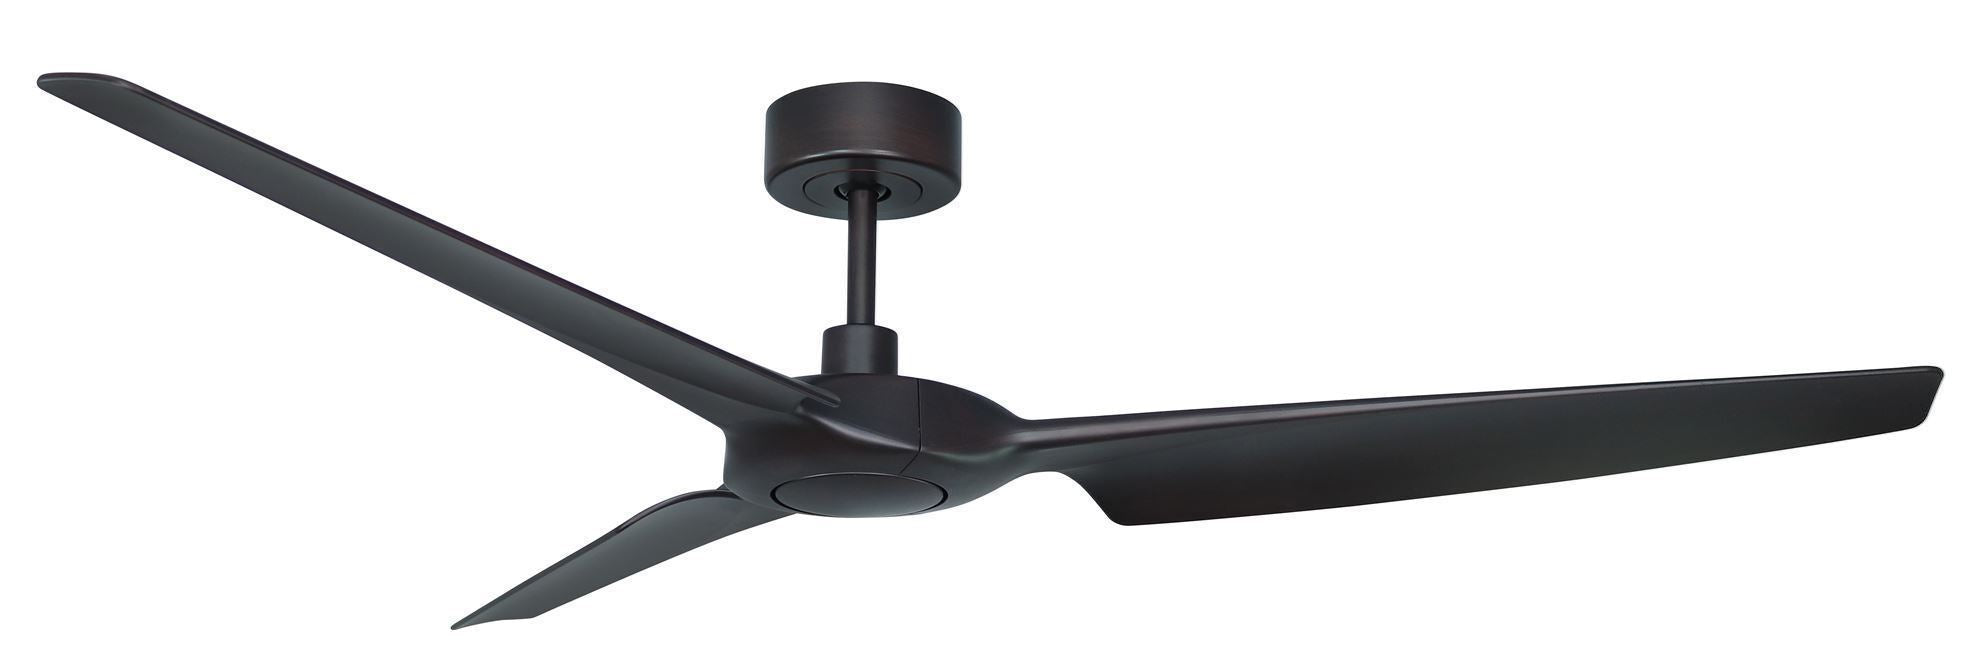 60 inch Astra Ceiling Fan by TroposAir - Oil Rubbed Bronze